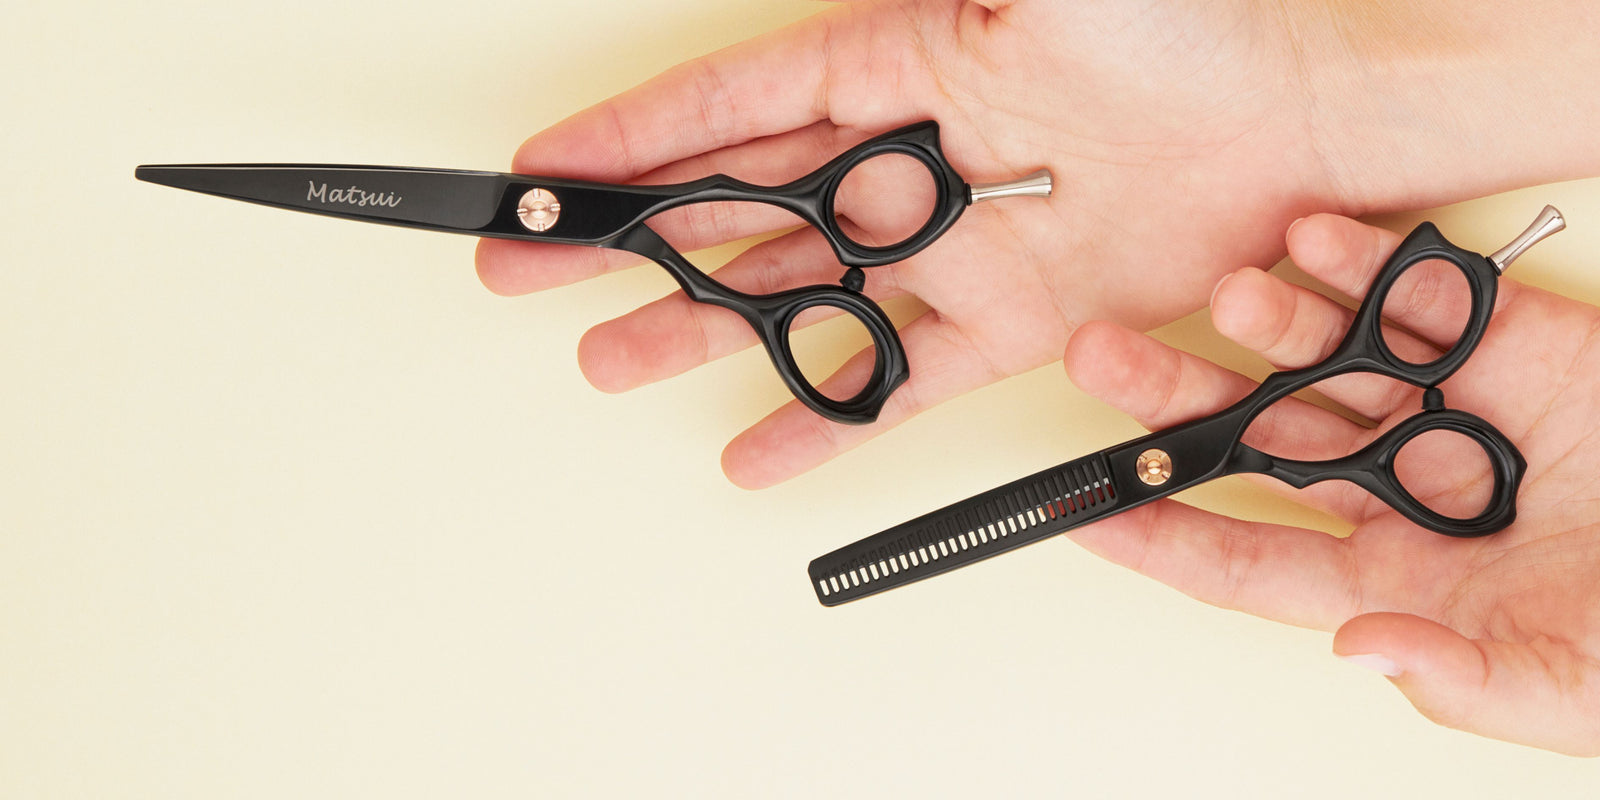 A Quick Money Saving Tip for Beauty on the Cheap: Keep Scissors in